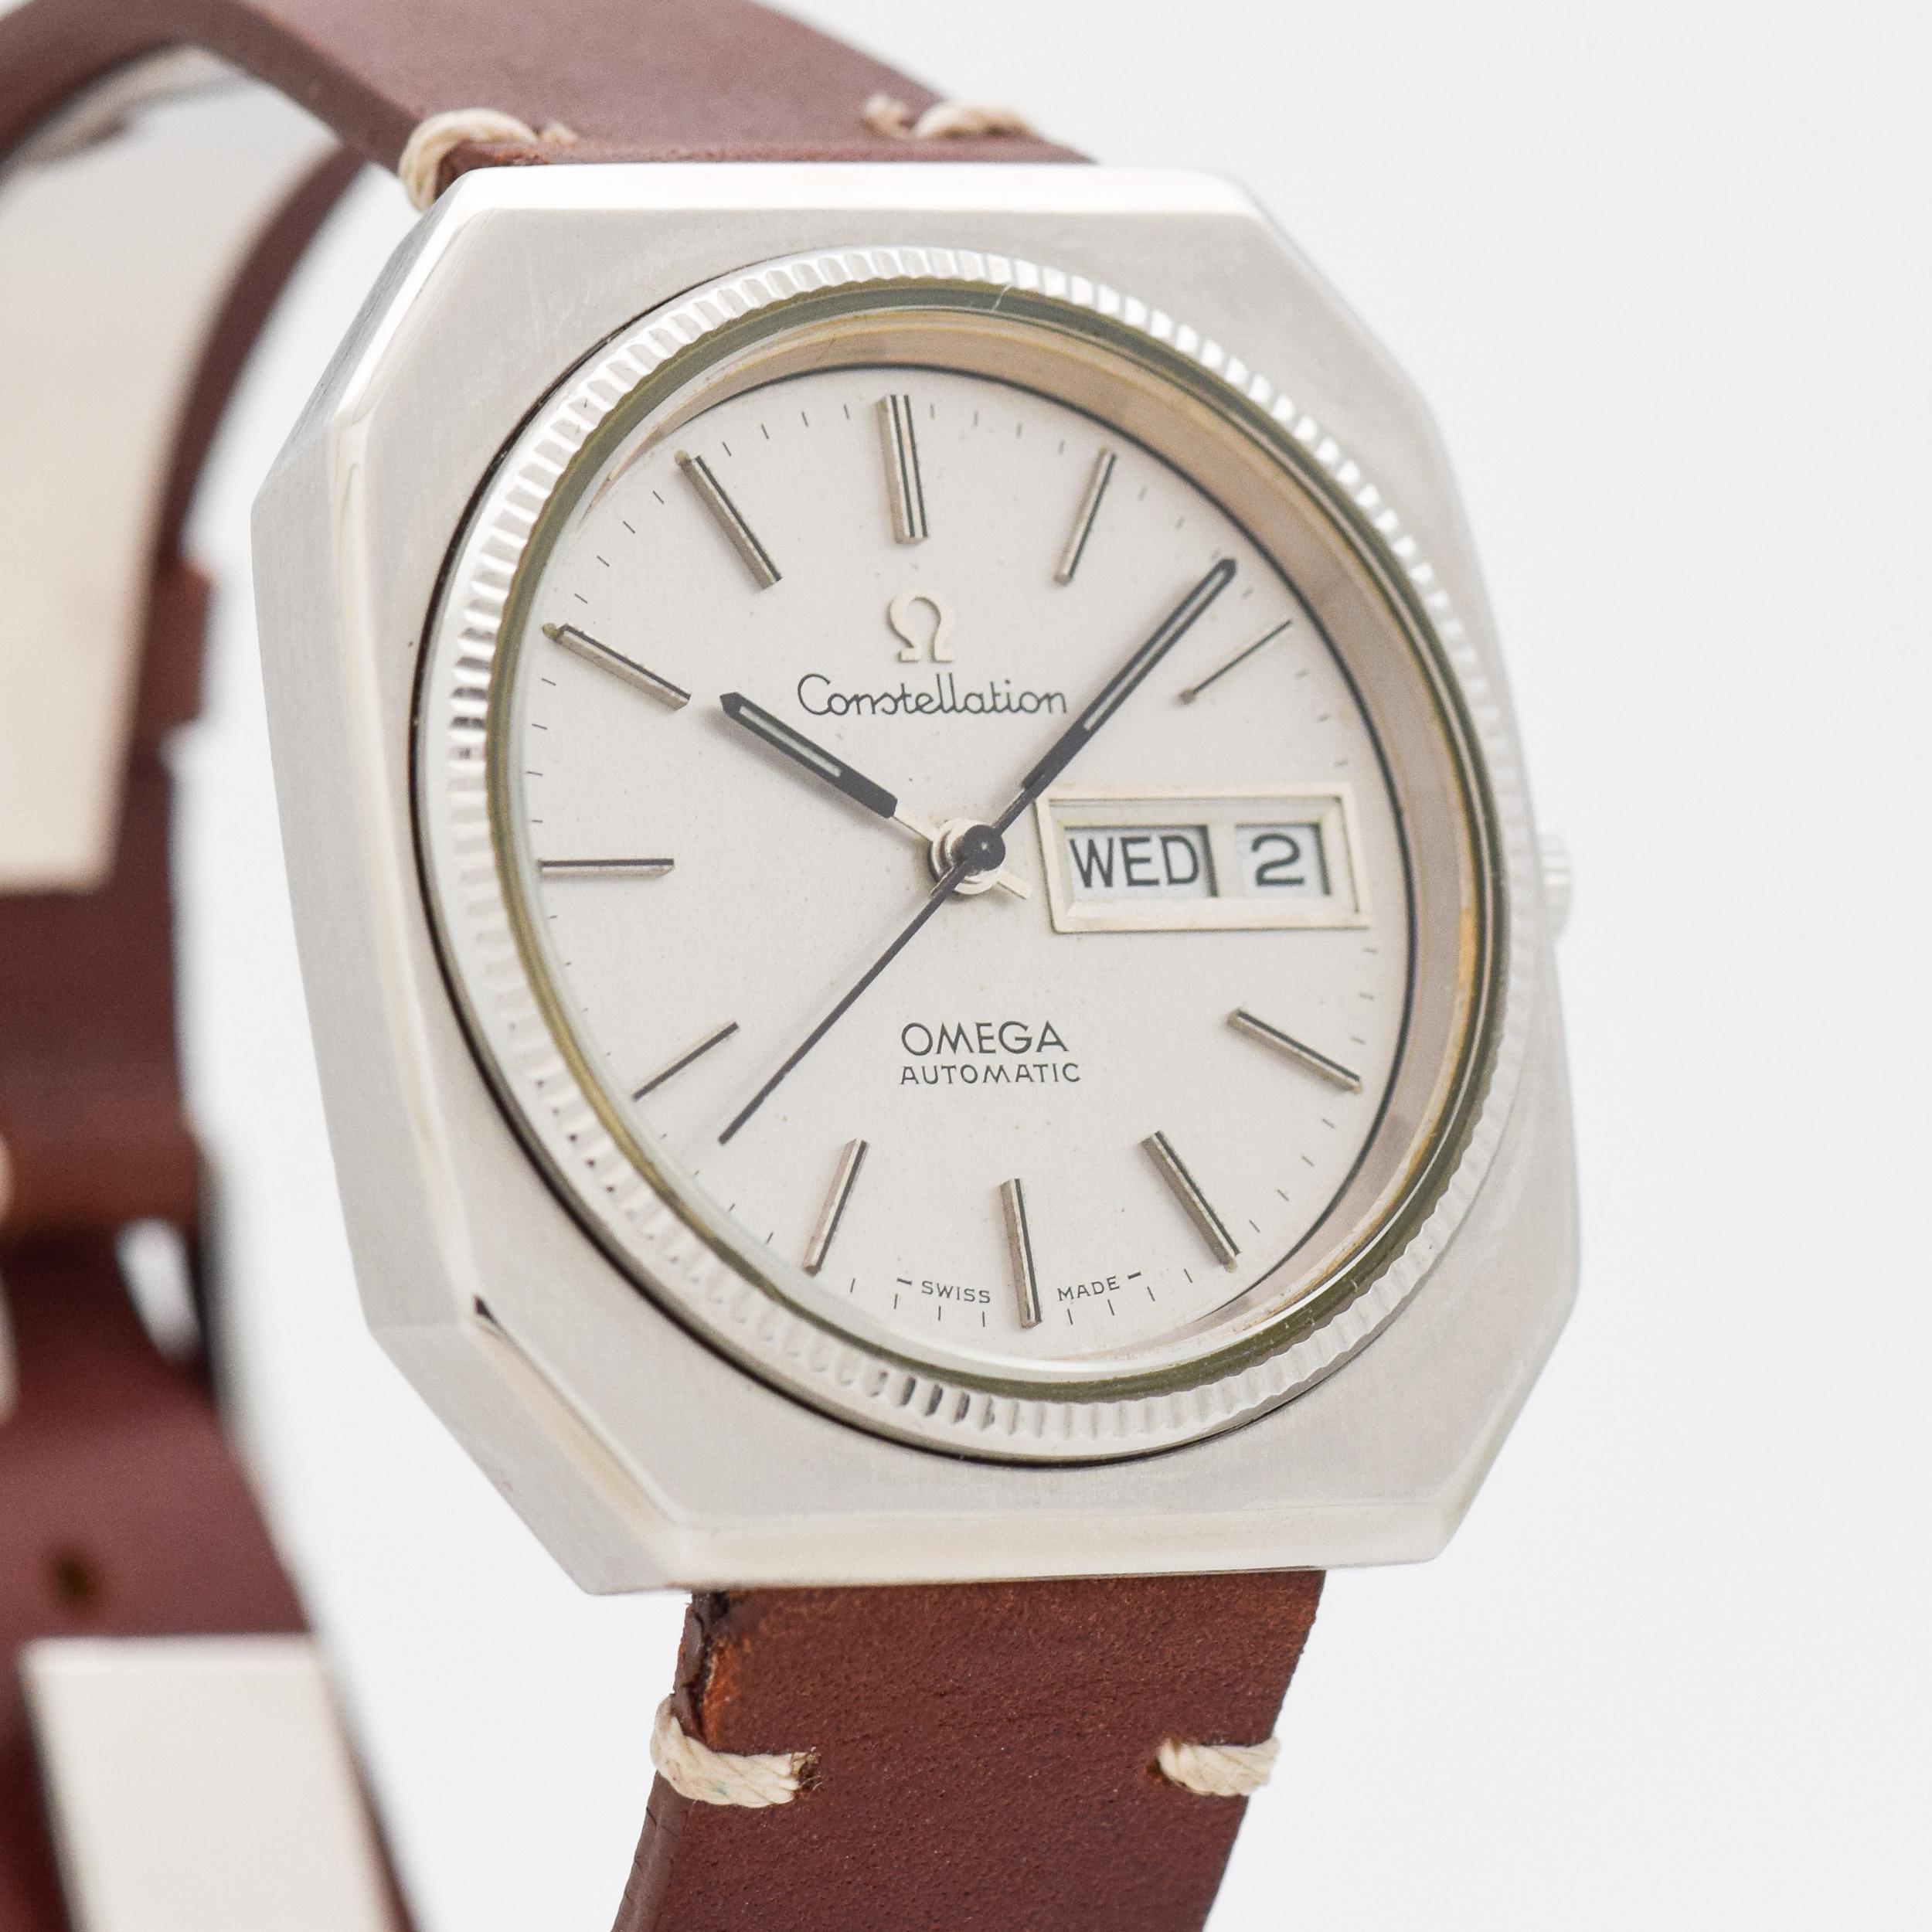 1975 Vintage Omega Automatic Day-Date Constellation Stainless Steel watch with Original Silver Dial with Applied Steel Stick/Bar/Baton Markers. 36mm x 38mm lug to lug (1.42 in. x 1.5 in.) 23 jewel, automatic caliber 1022 movement. Triple Signed.